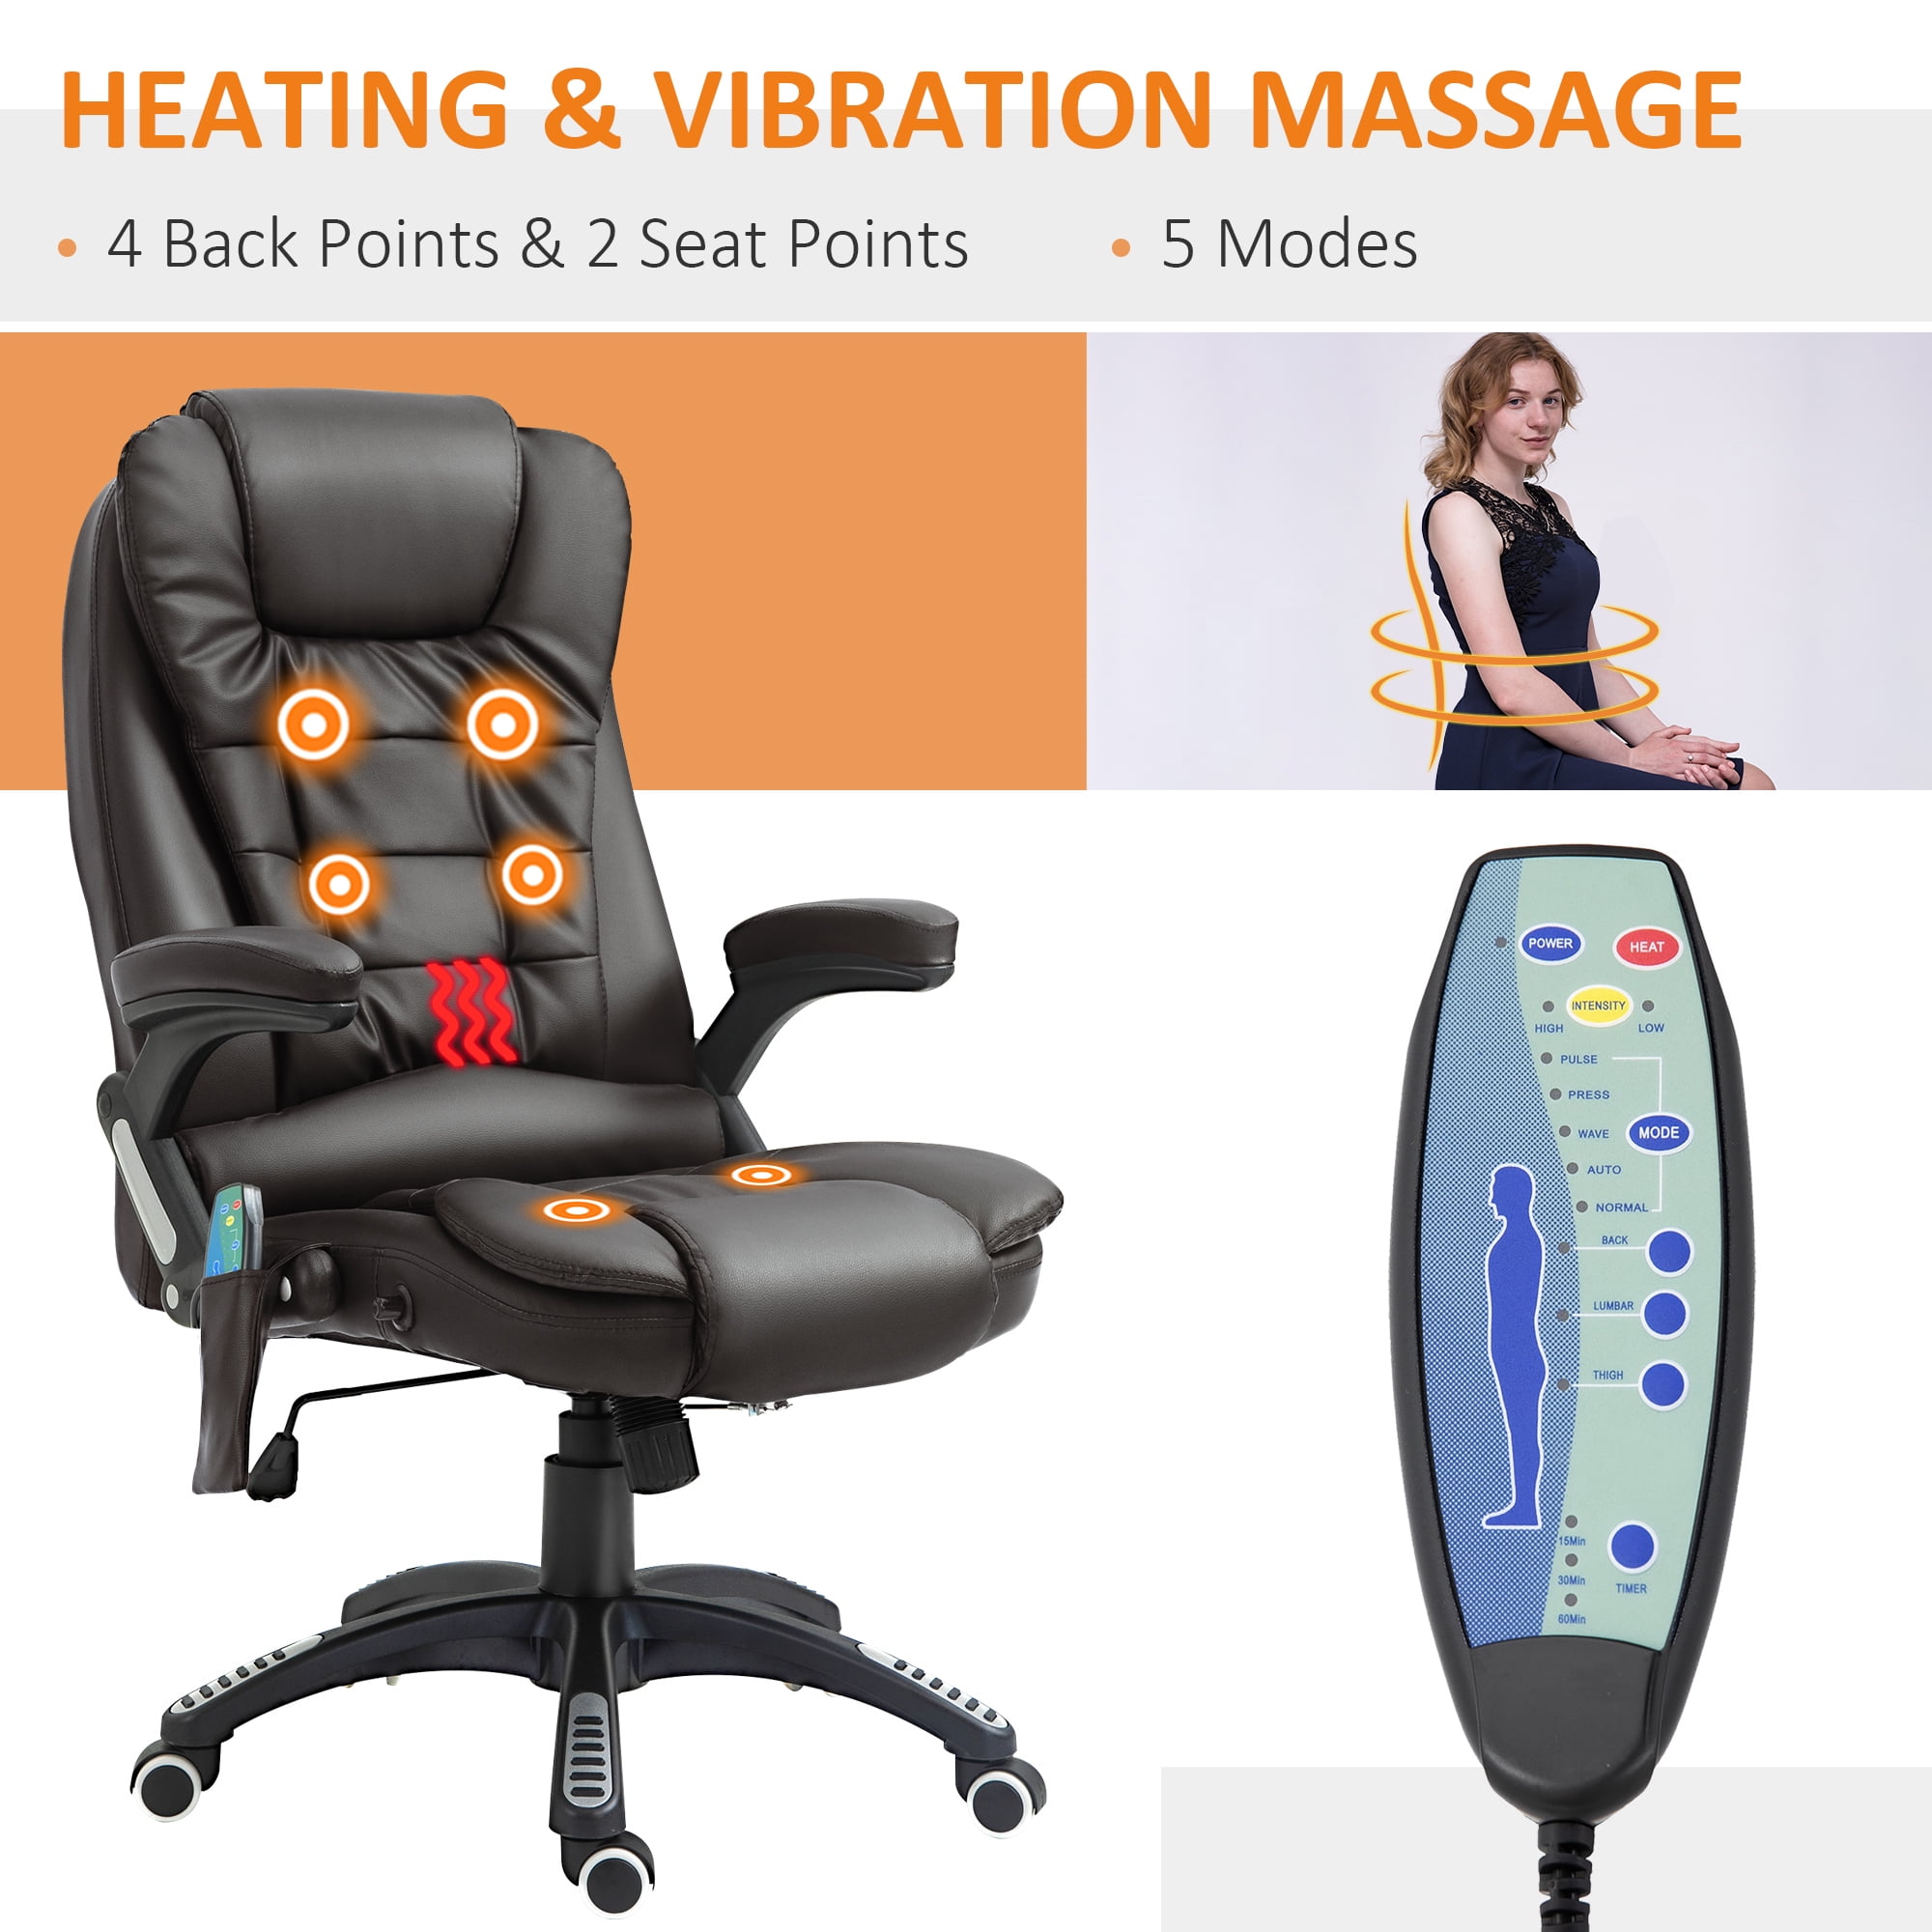 Tested personalized heating system: a heated chair (left), a heated